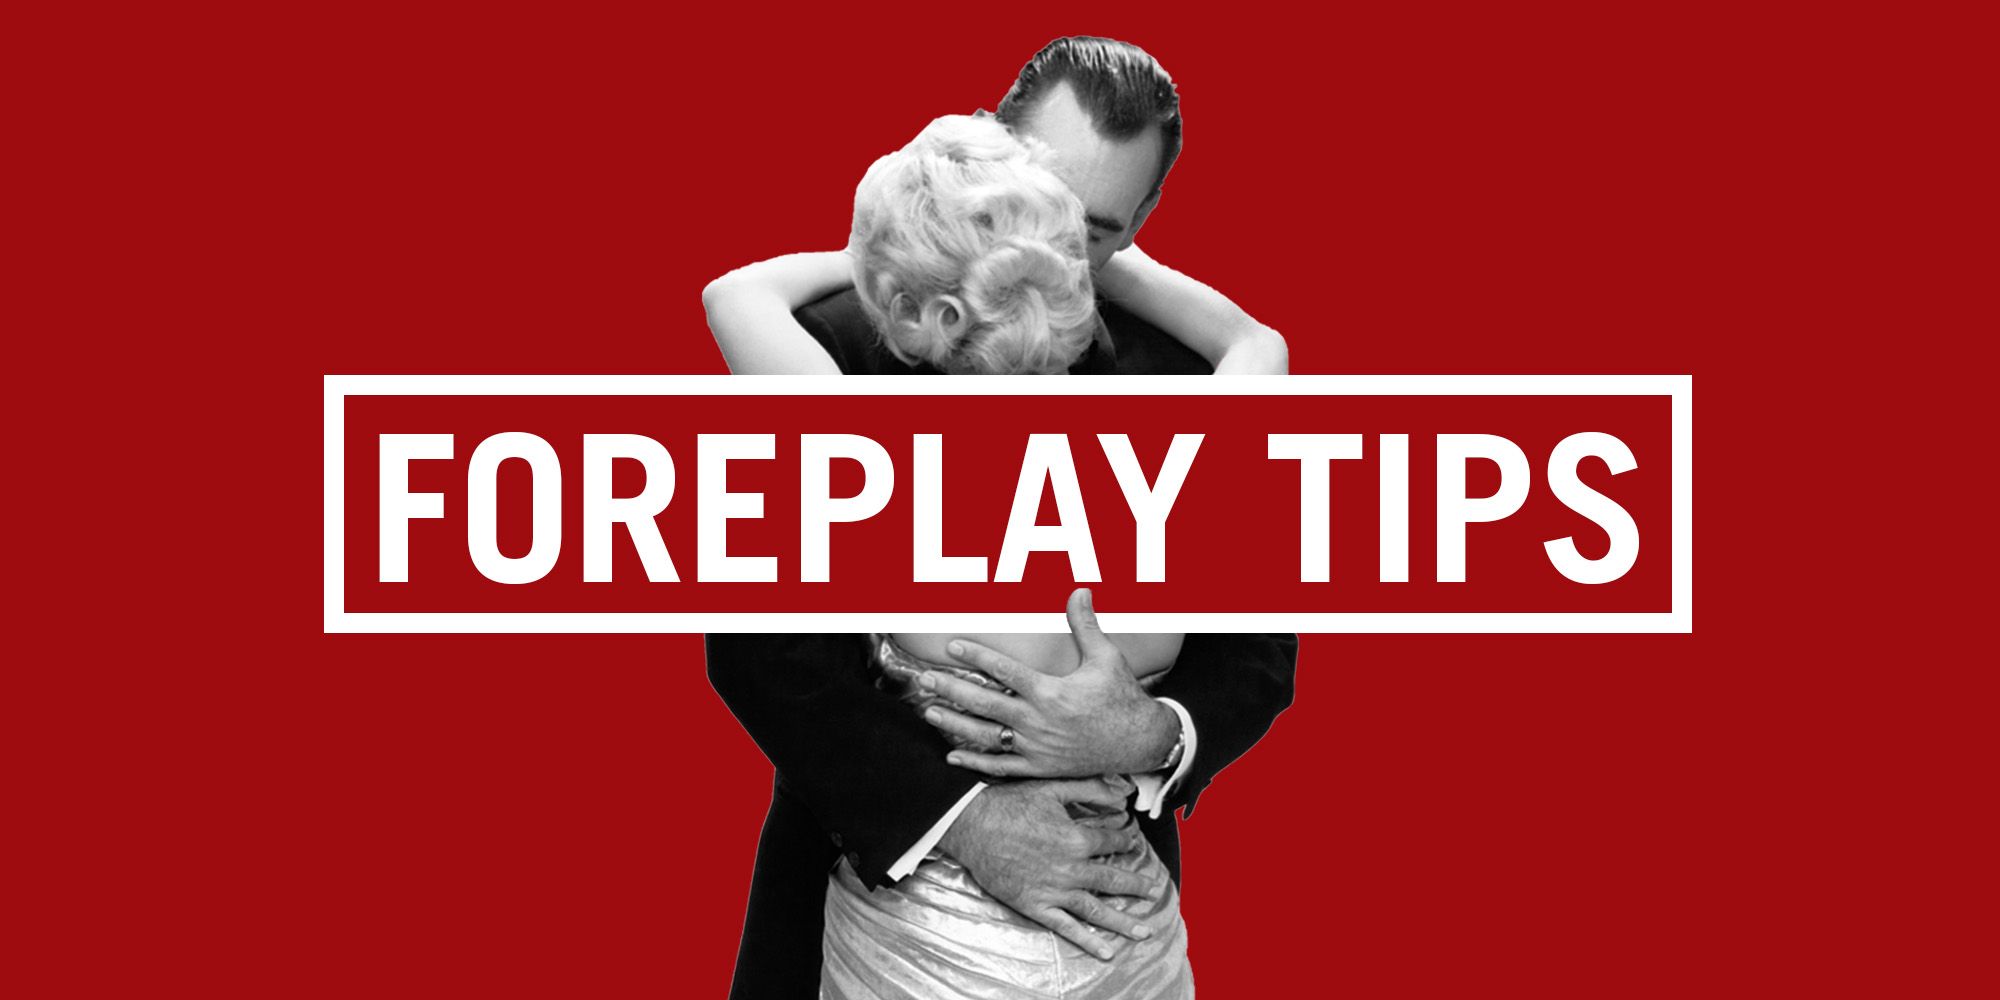 womens foreplay tips 